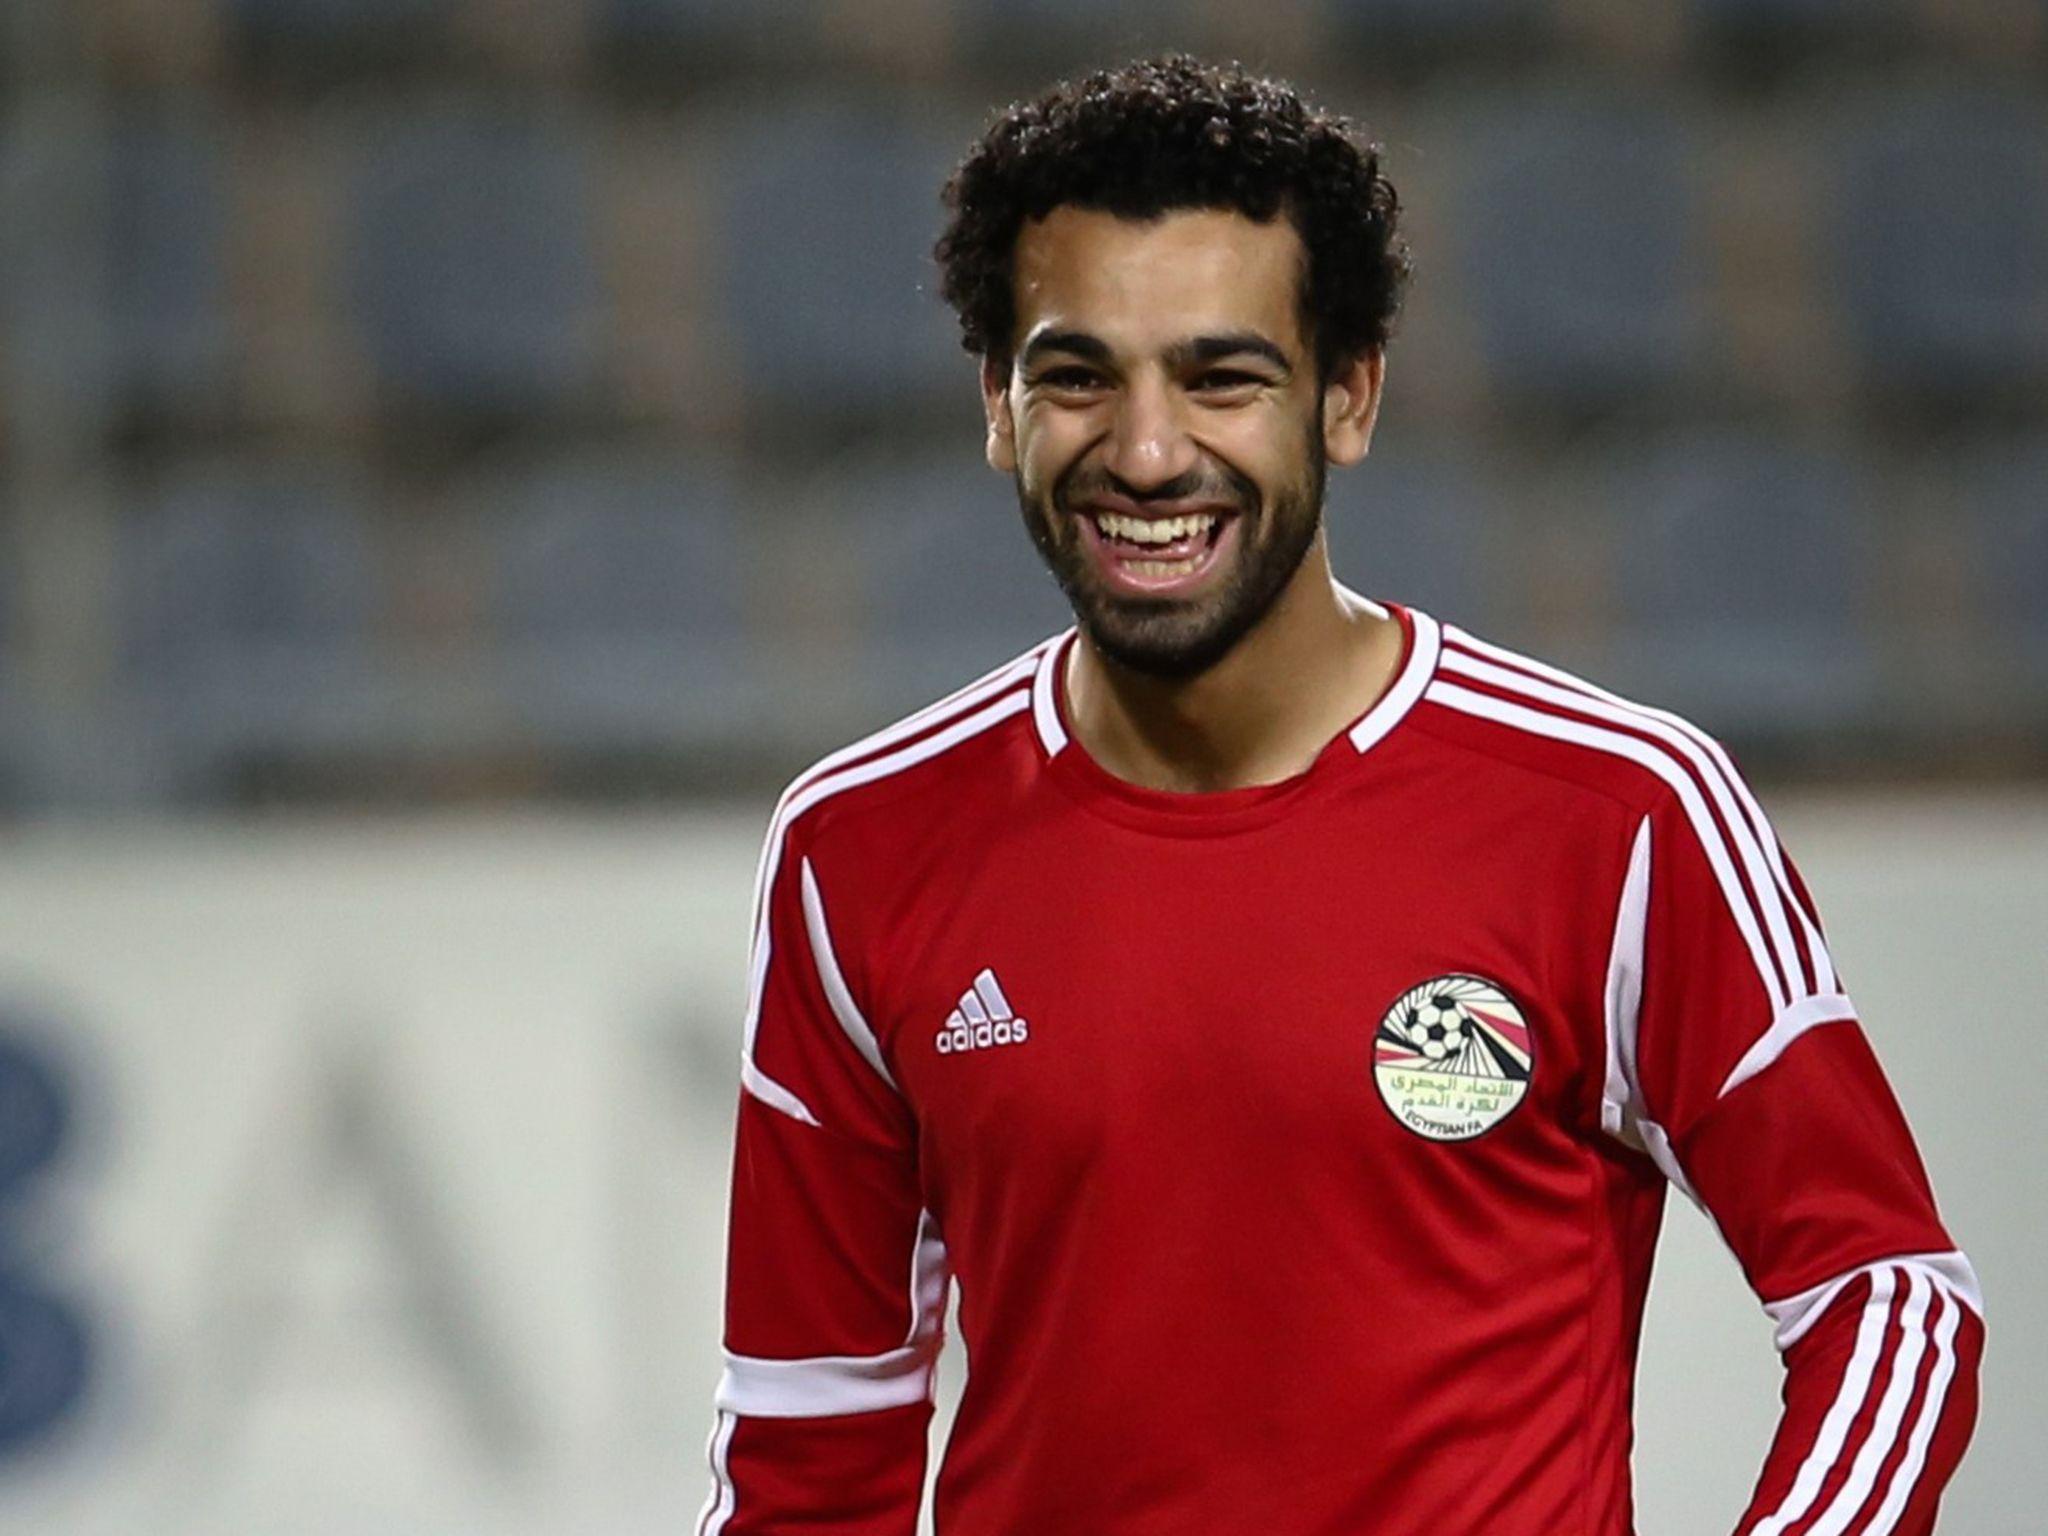 Mohamed Salah to wear No 74 shirt during loan spell from Chelsea